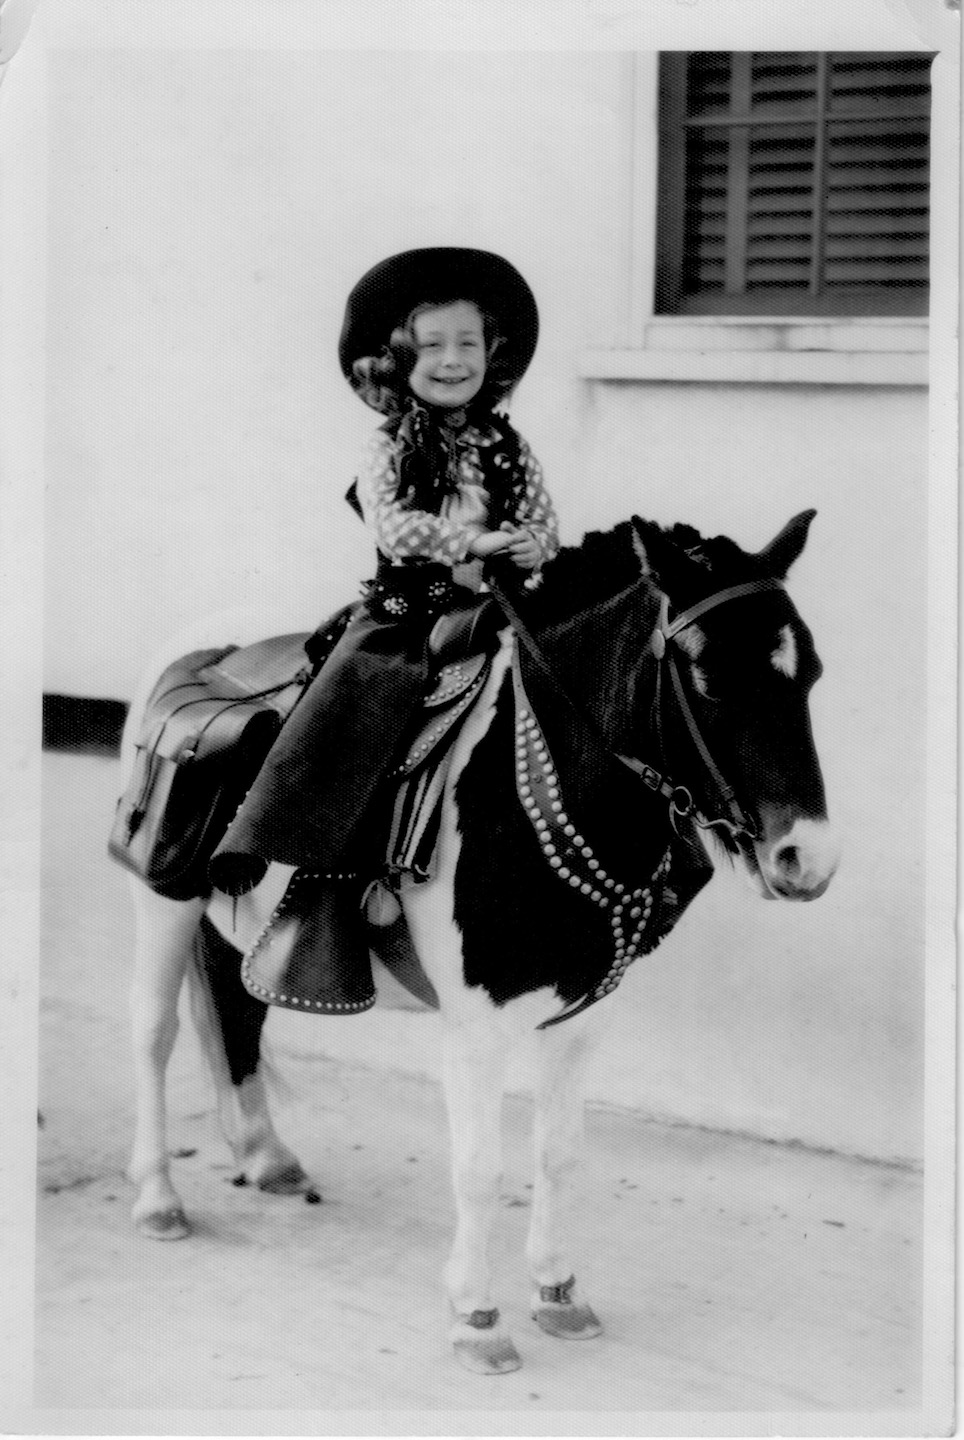 Terry in the driveway of her home, Culver City, CA. “I was always a horse-crazy girl, and I love this photo because in my head, I’m NOT in a driveway.  I’m a cowgirl riding the range.”